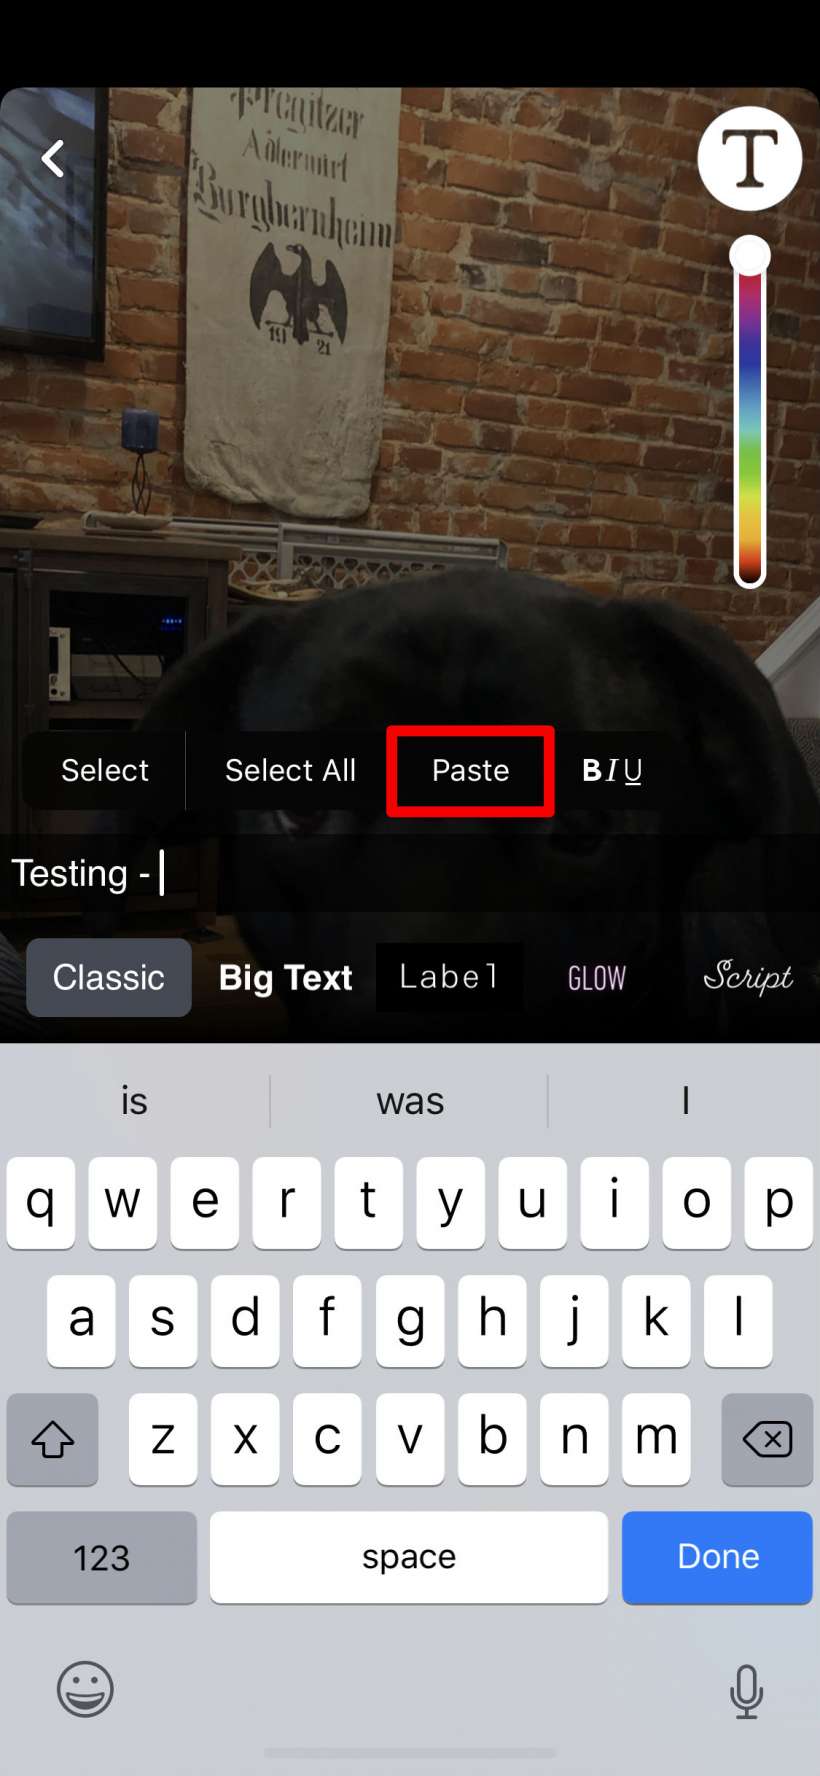 How to use special characters and symbols in Instagram, Facebook, Reddit and other posts on iPhone and iPad.